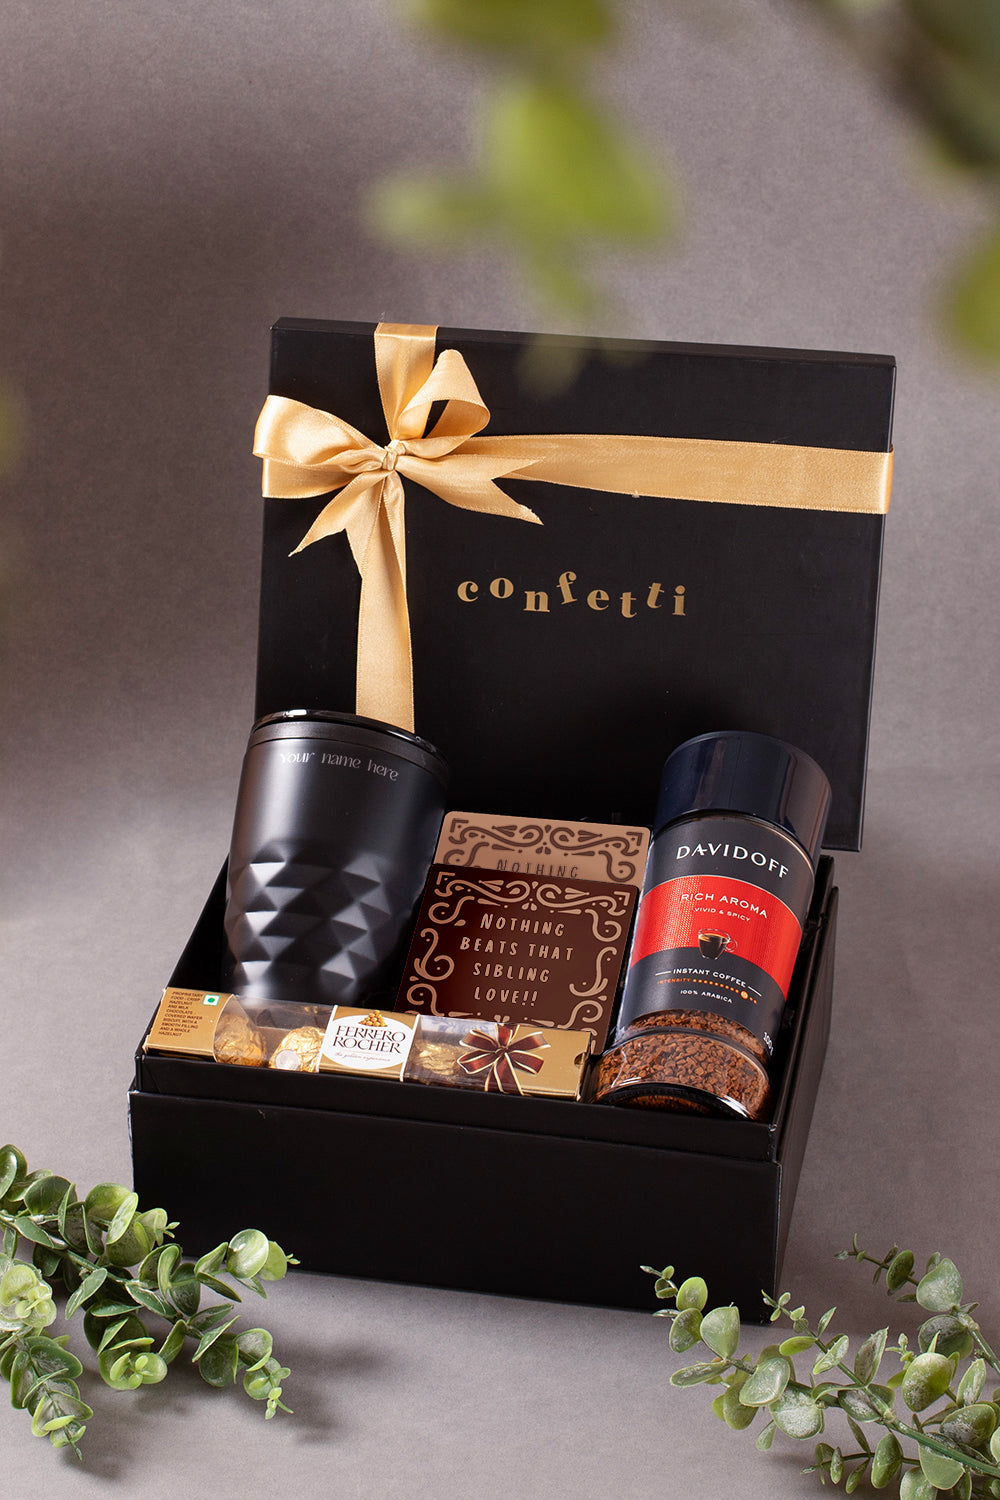 Old Fashioned Cheer | Gourmet Snacks Christmas Gift Basket for Him or Her -  Walmart.com